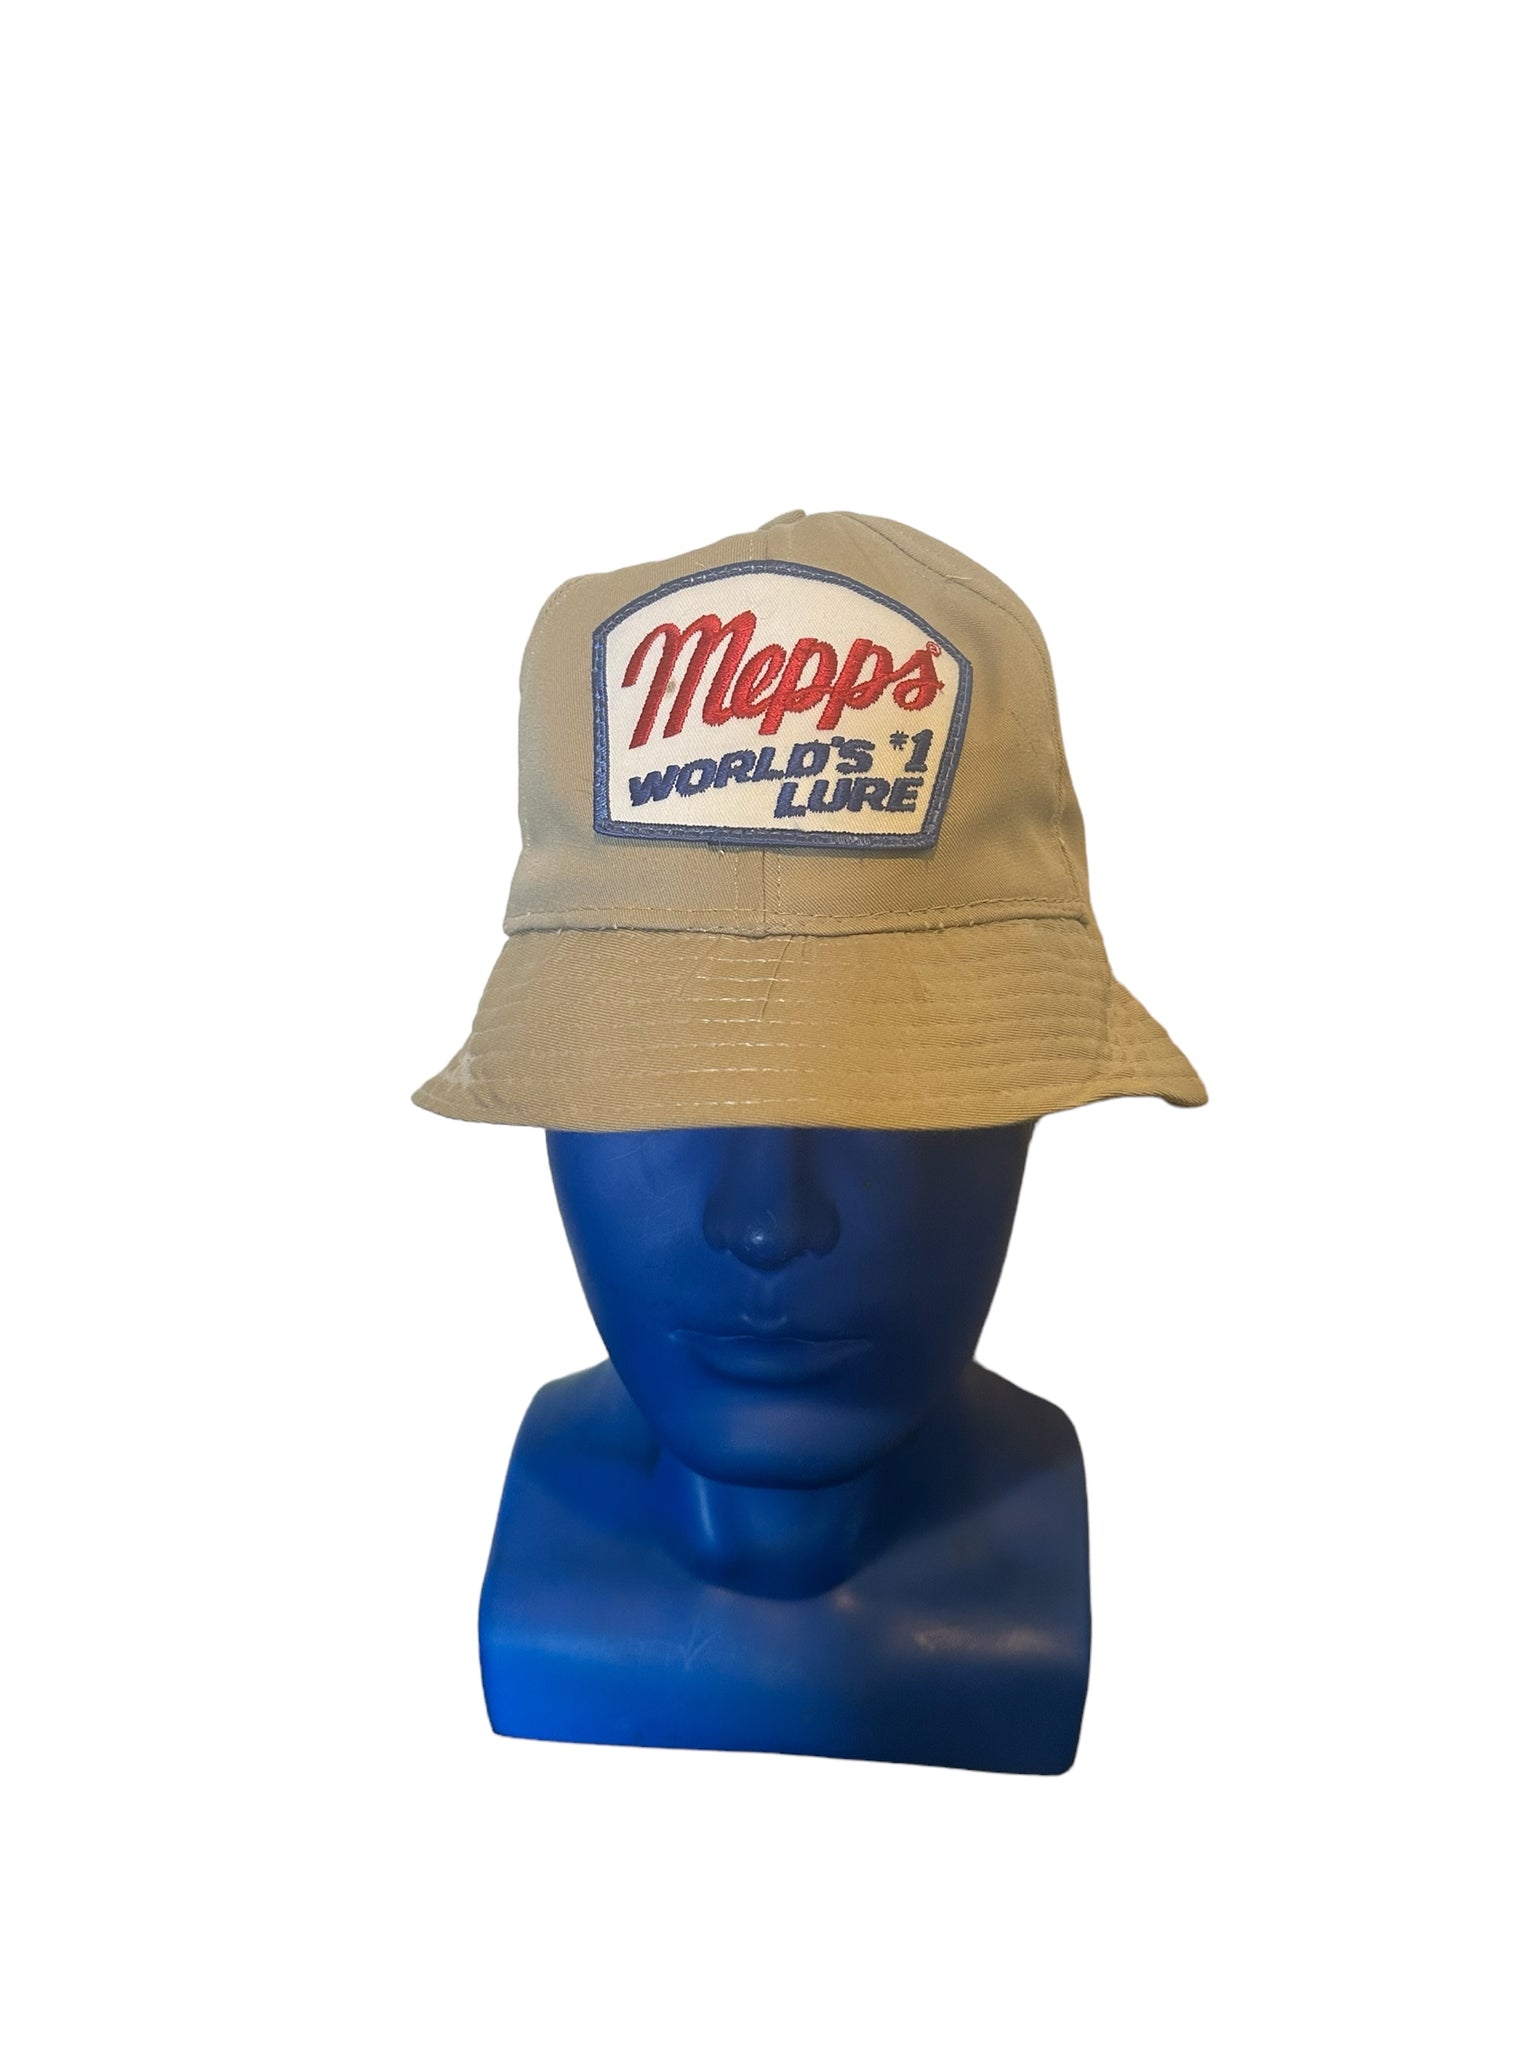 vintage mepps world #1 lure patch bucket hat tan color size m Made In The USA